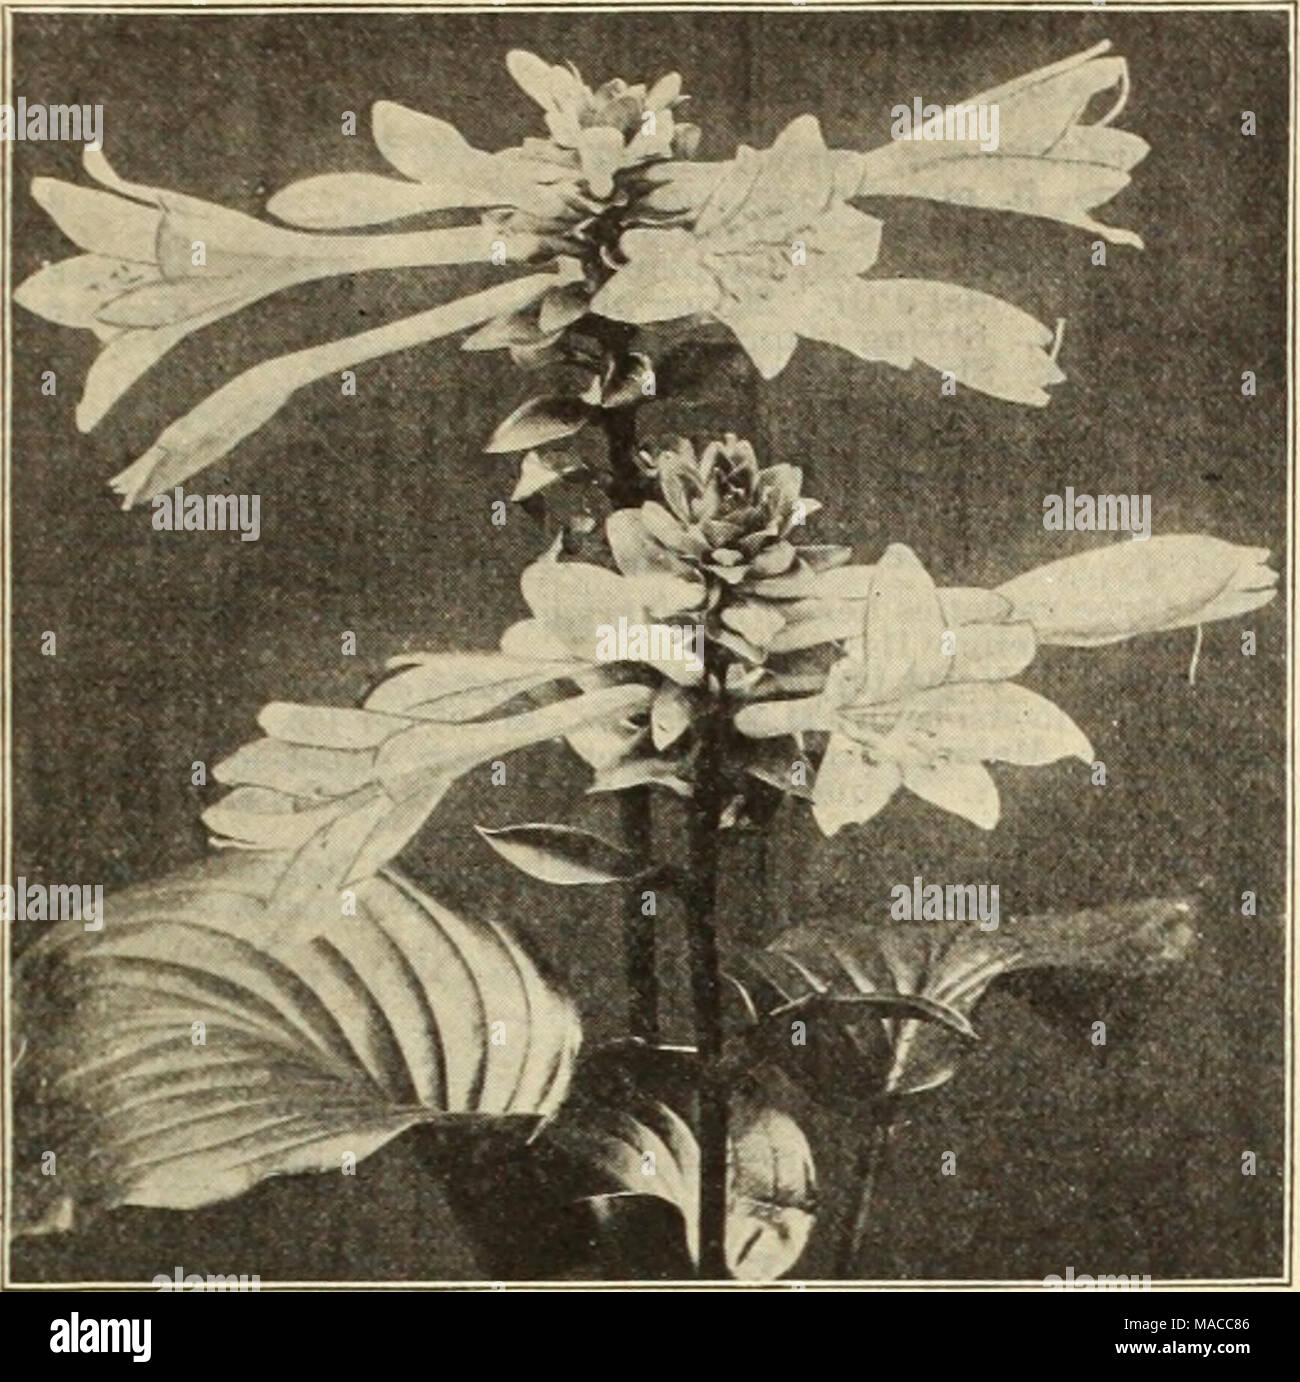 . Dreer's wholesale price list : bulbs for florists plants for florists flower seeds for florists fungicides, fertilizers, insecticides, implements, etc . Rare Hardy Harts^^tongue Ferns. Scolopendrlum Vulgare. The ordinary English Harts-tongue. $3.00 per dozen; $20.00 per 100. Scolopendrium Vulgare Digitato Crlstatum. Ends of fronds much branched and crested. $3.50 per dozen; $25.00 per 100. Scolopendrlum Vulgare Marginatum. Edges of fronds deeply serrated. $3.50 per dozen; $25.00 per 100. Scolopendrlum Vulgare Undulatum. Edges of fronds beautifully waved and crested. $3.50 per dozen; $25.00 p Stock Photo